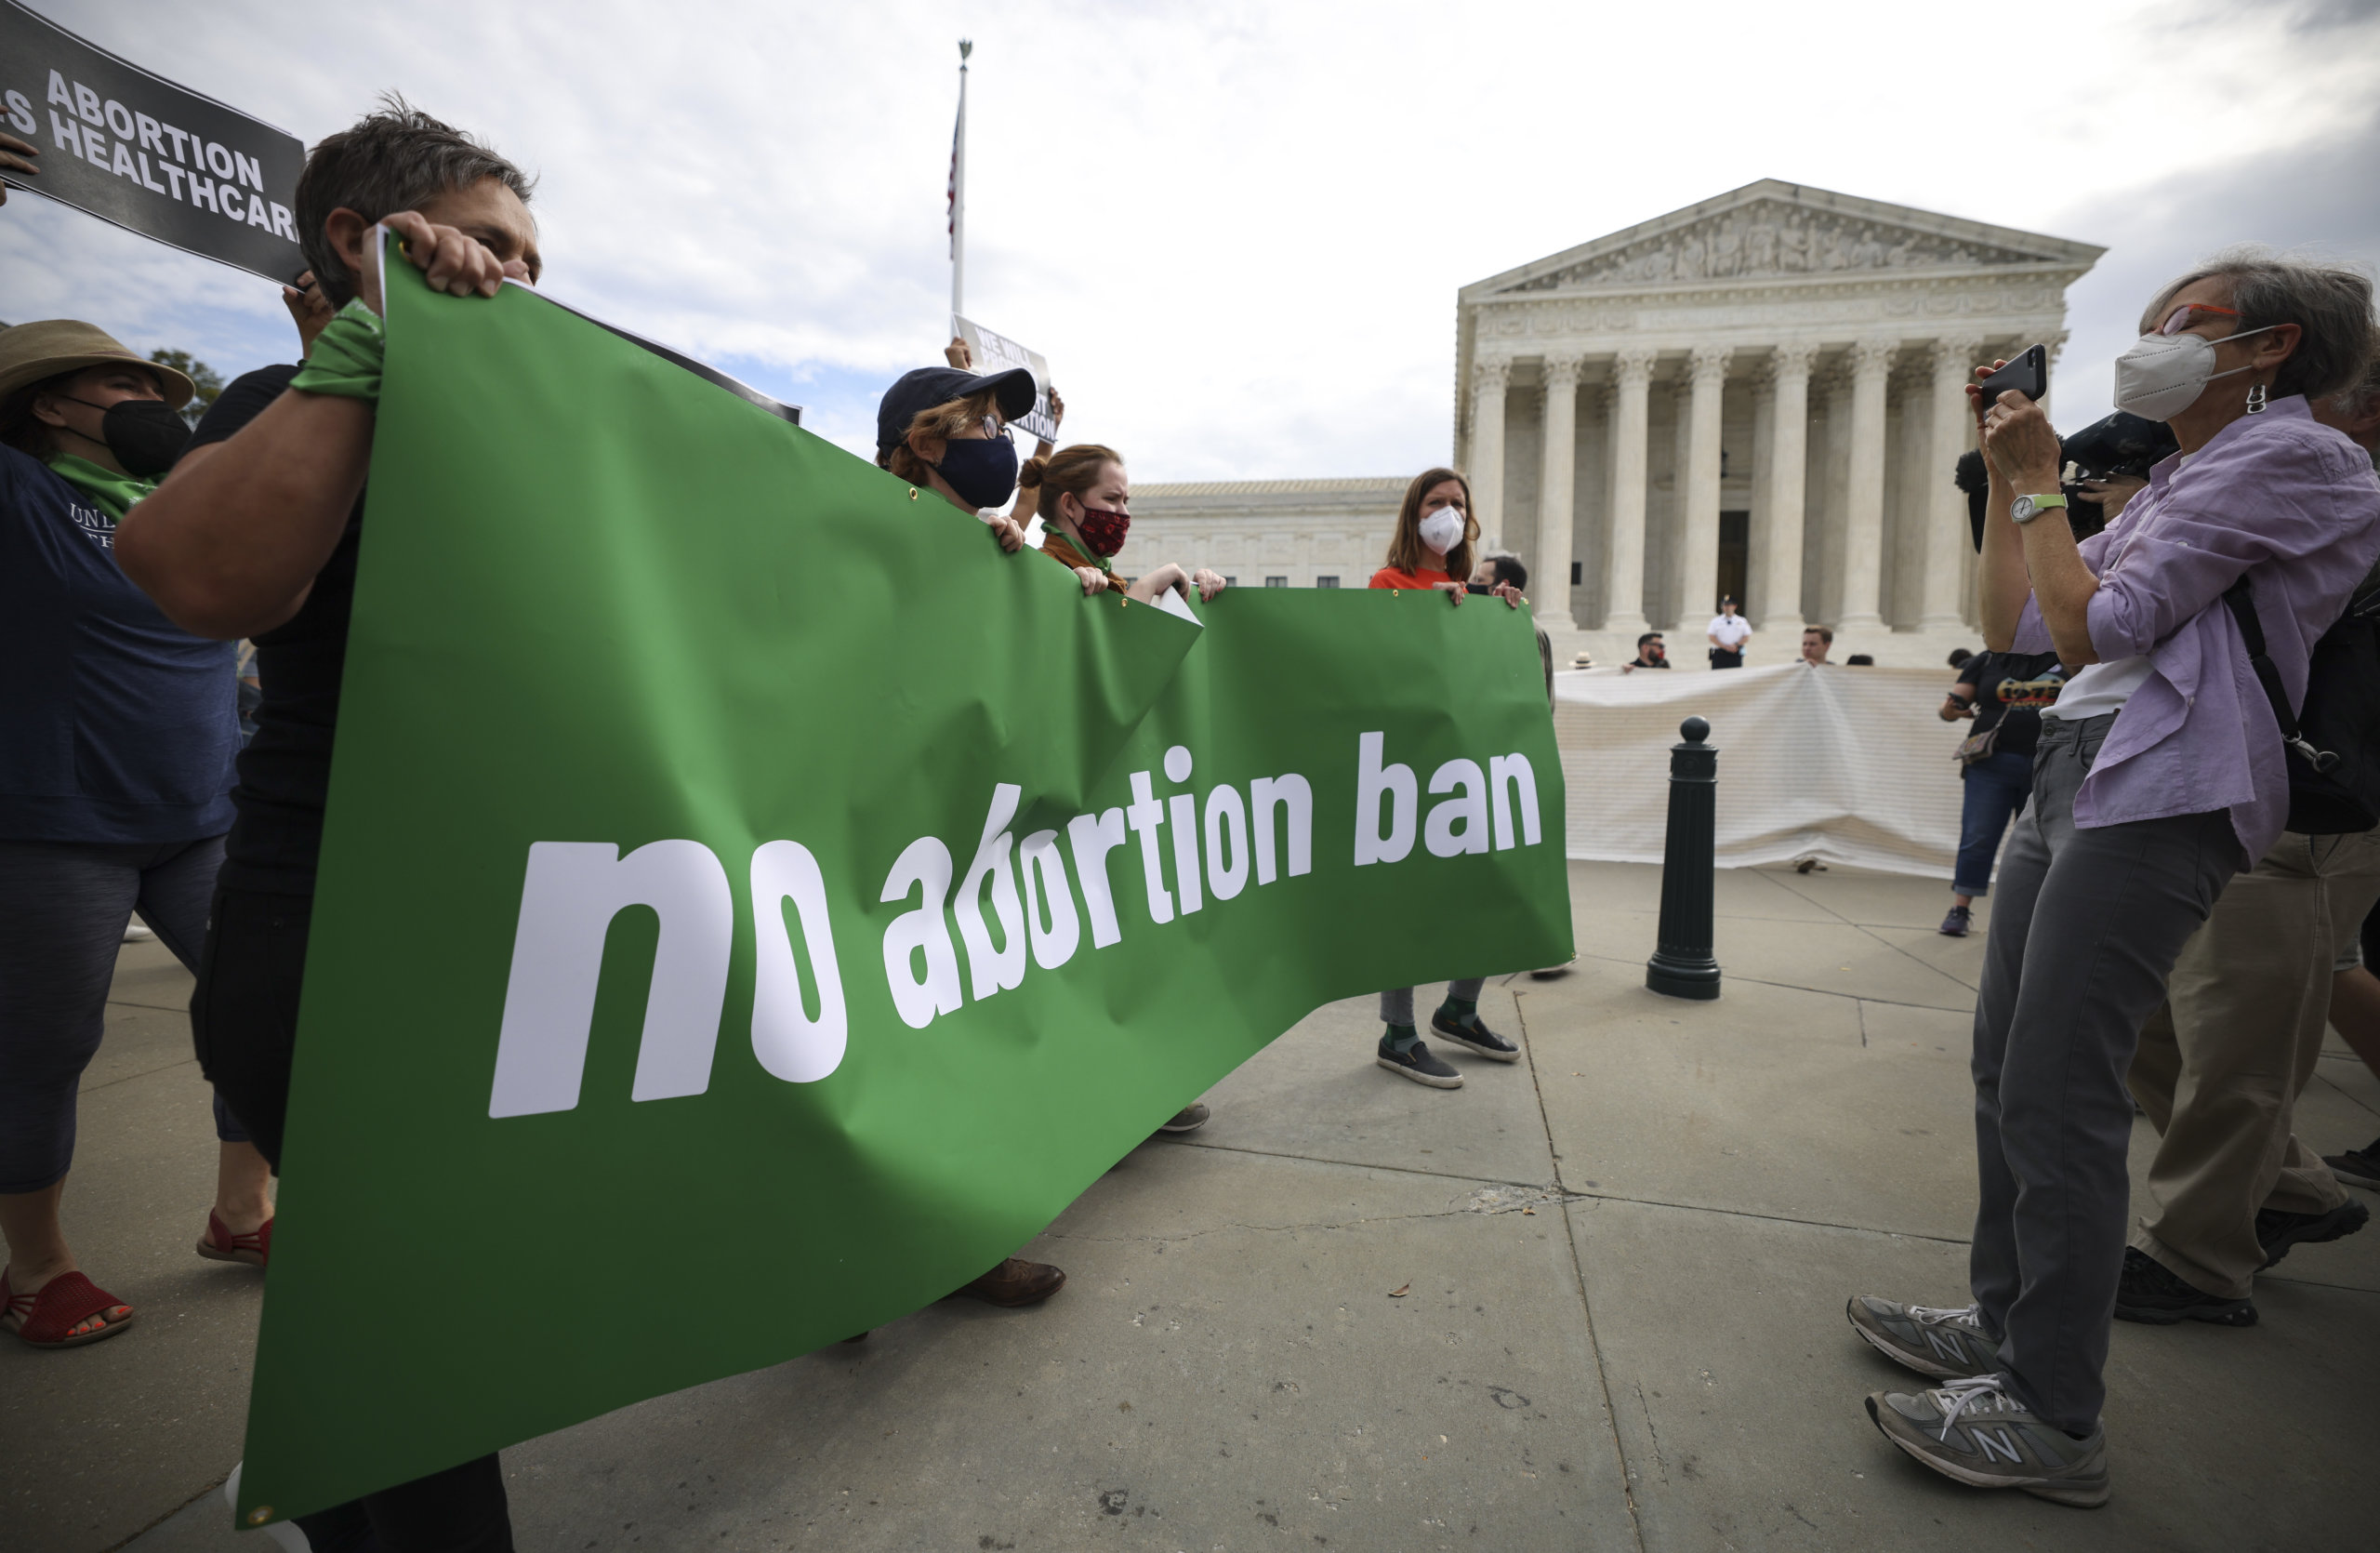 Oklahoma anti-abortion laws could add to strain on NM clinics